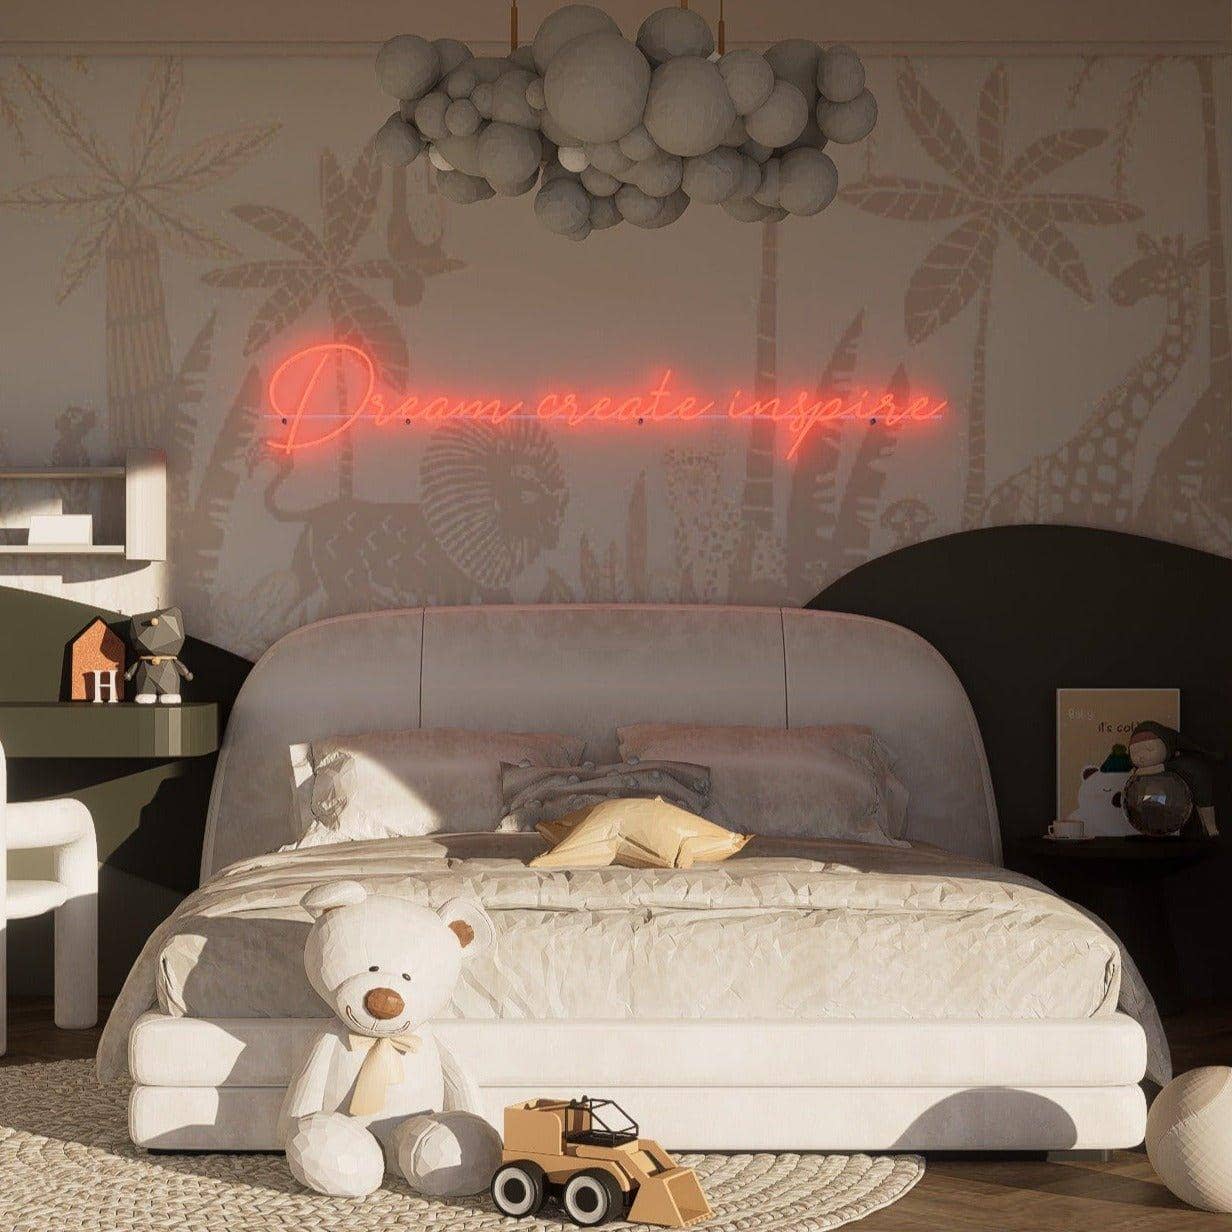 red-neon-lights-are-lit-during-the-day-and-displayed-in-the-bedroom-dream-creat-inspire